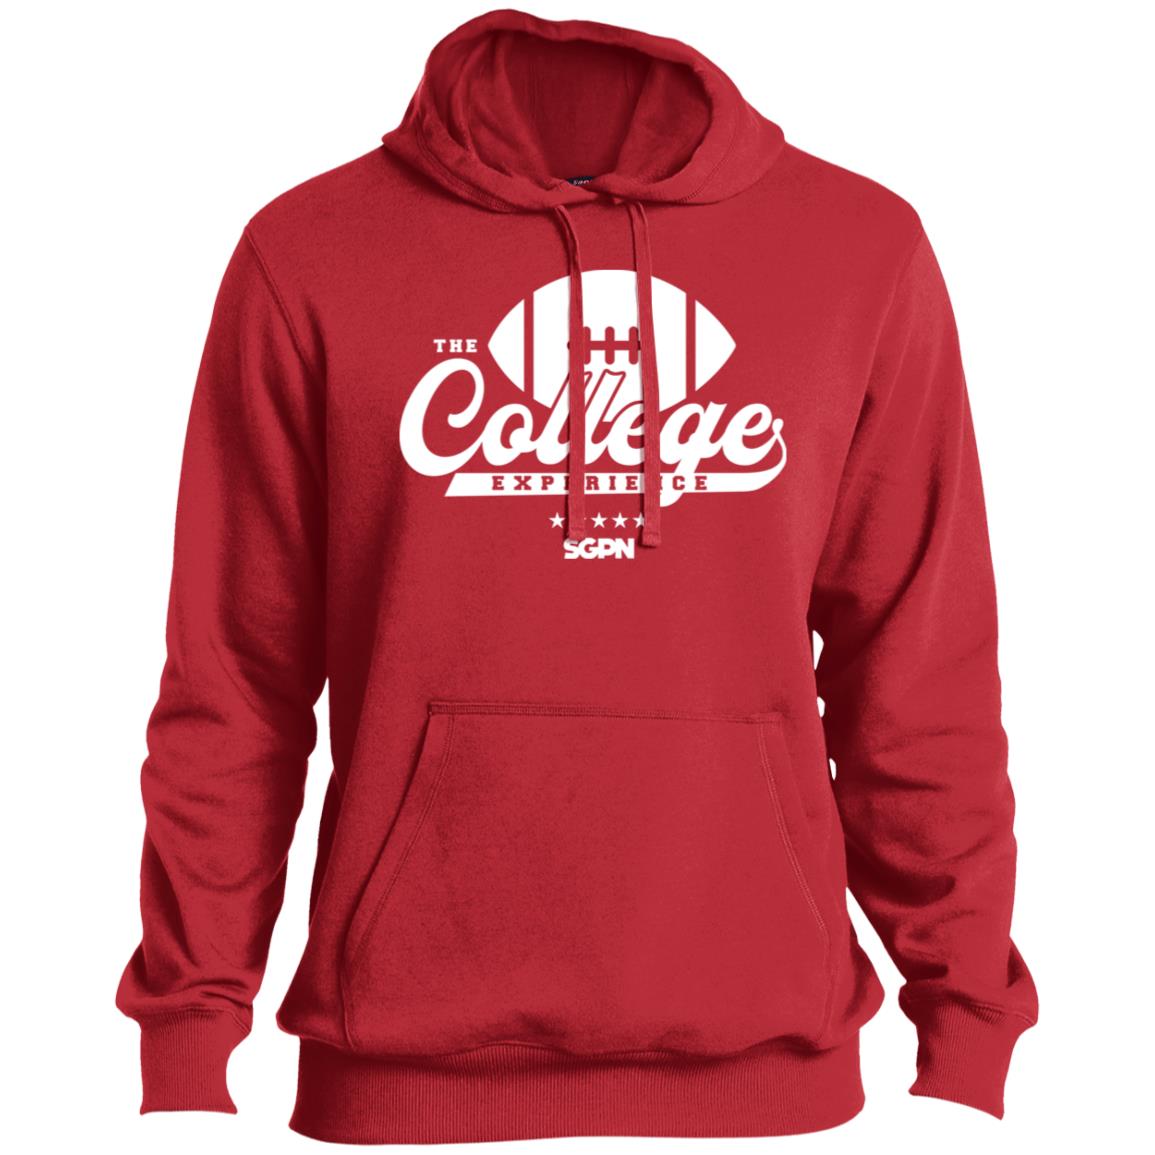 The College Experience Football - Pullover Hoodie